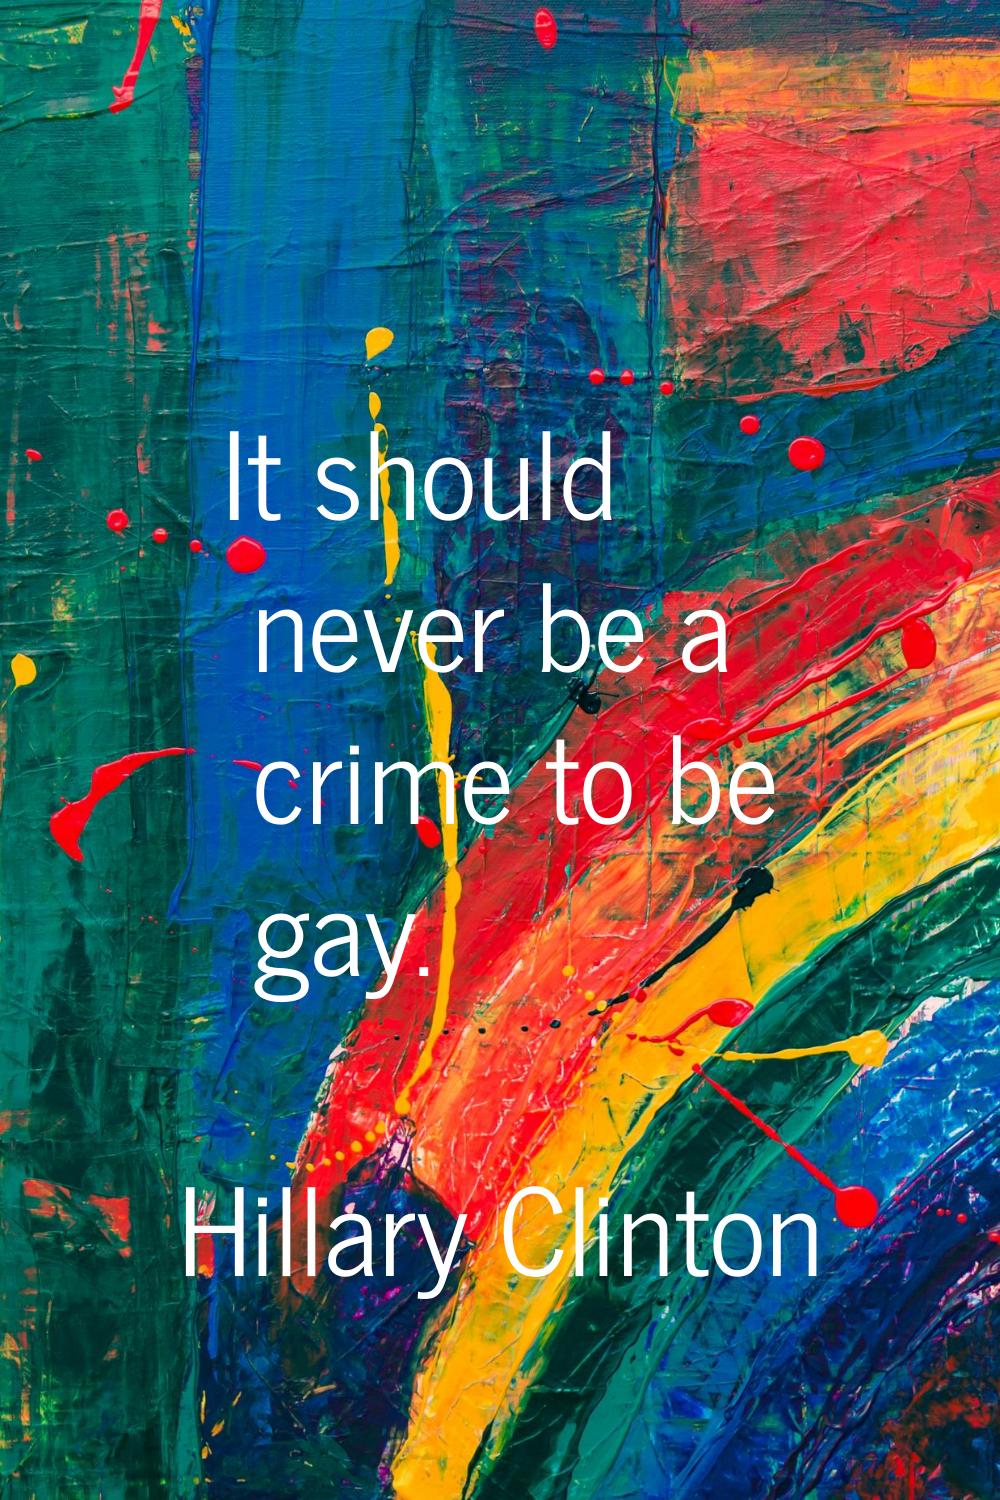 It should never be a crime to be gay.